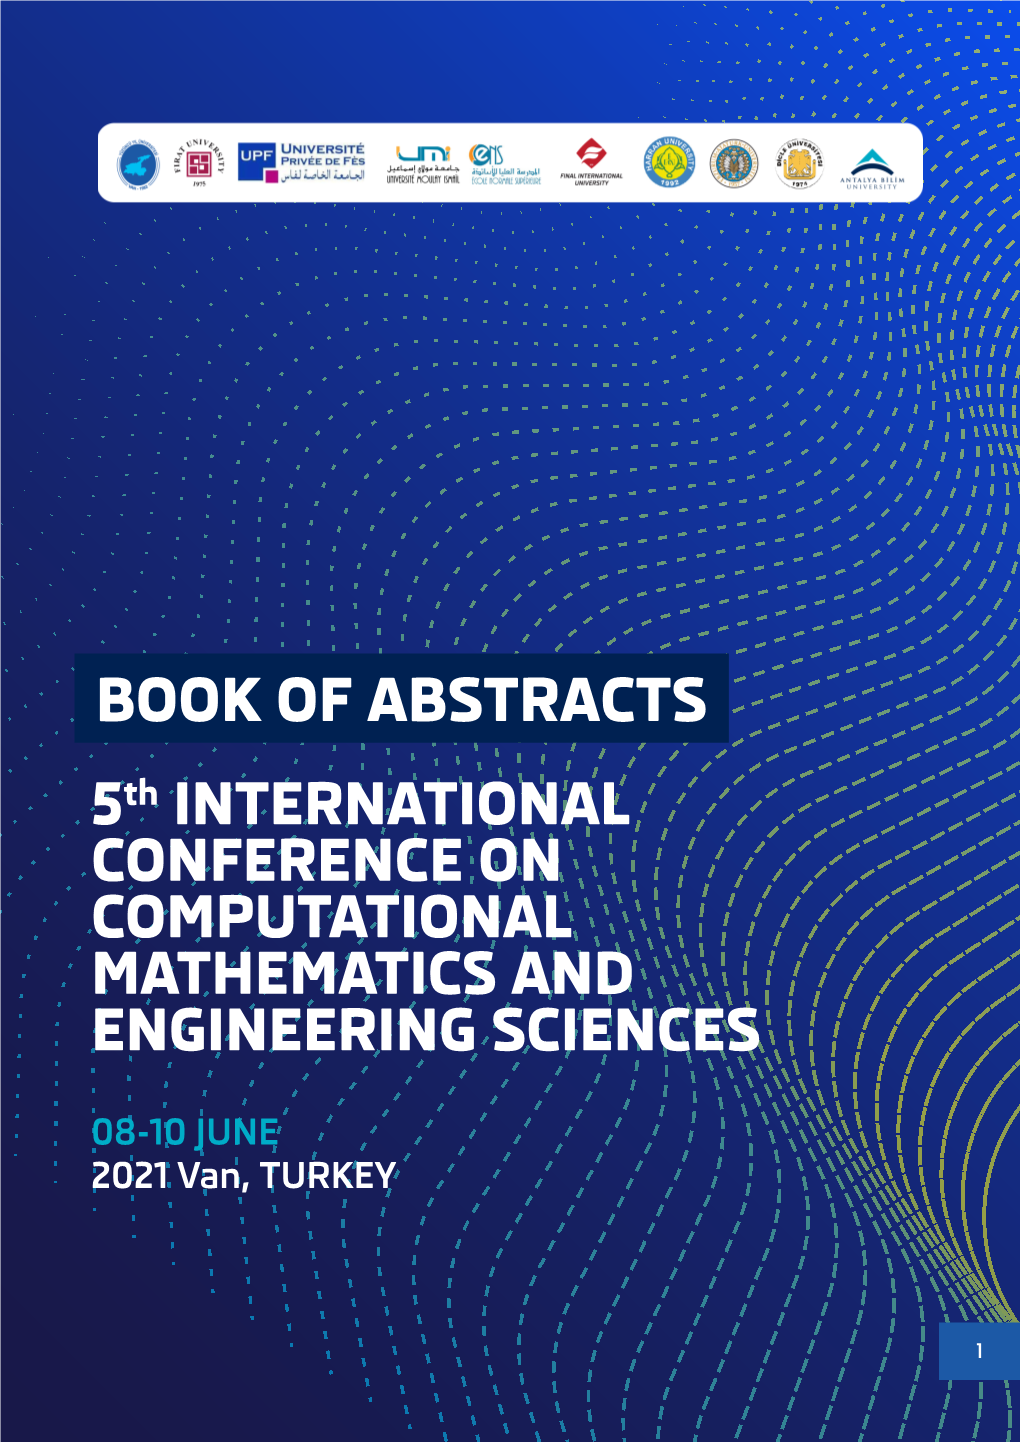 BOOK of ABSTRACTS 5Th INTERNATIONAL CONFERENCE on COMPUTATIONAL MATHEMATICS and ENGINEERING SCIENCES